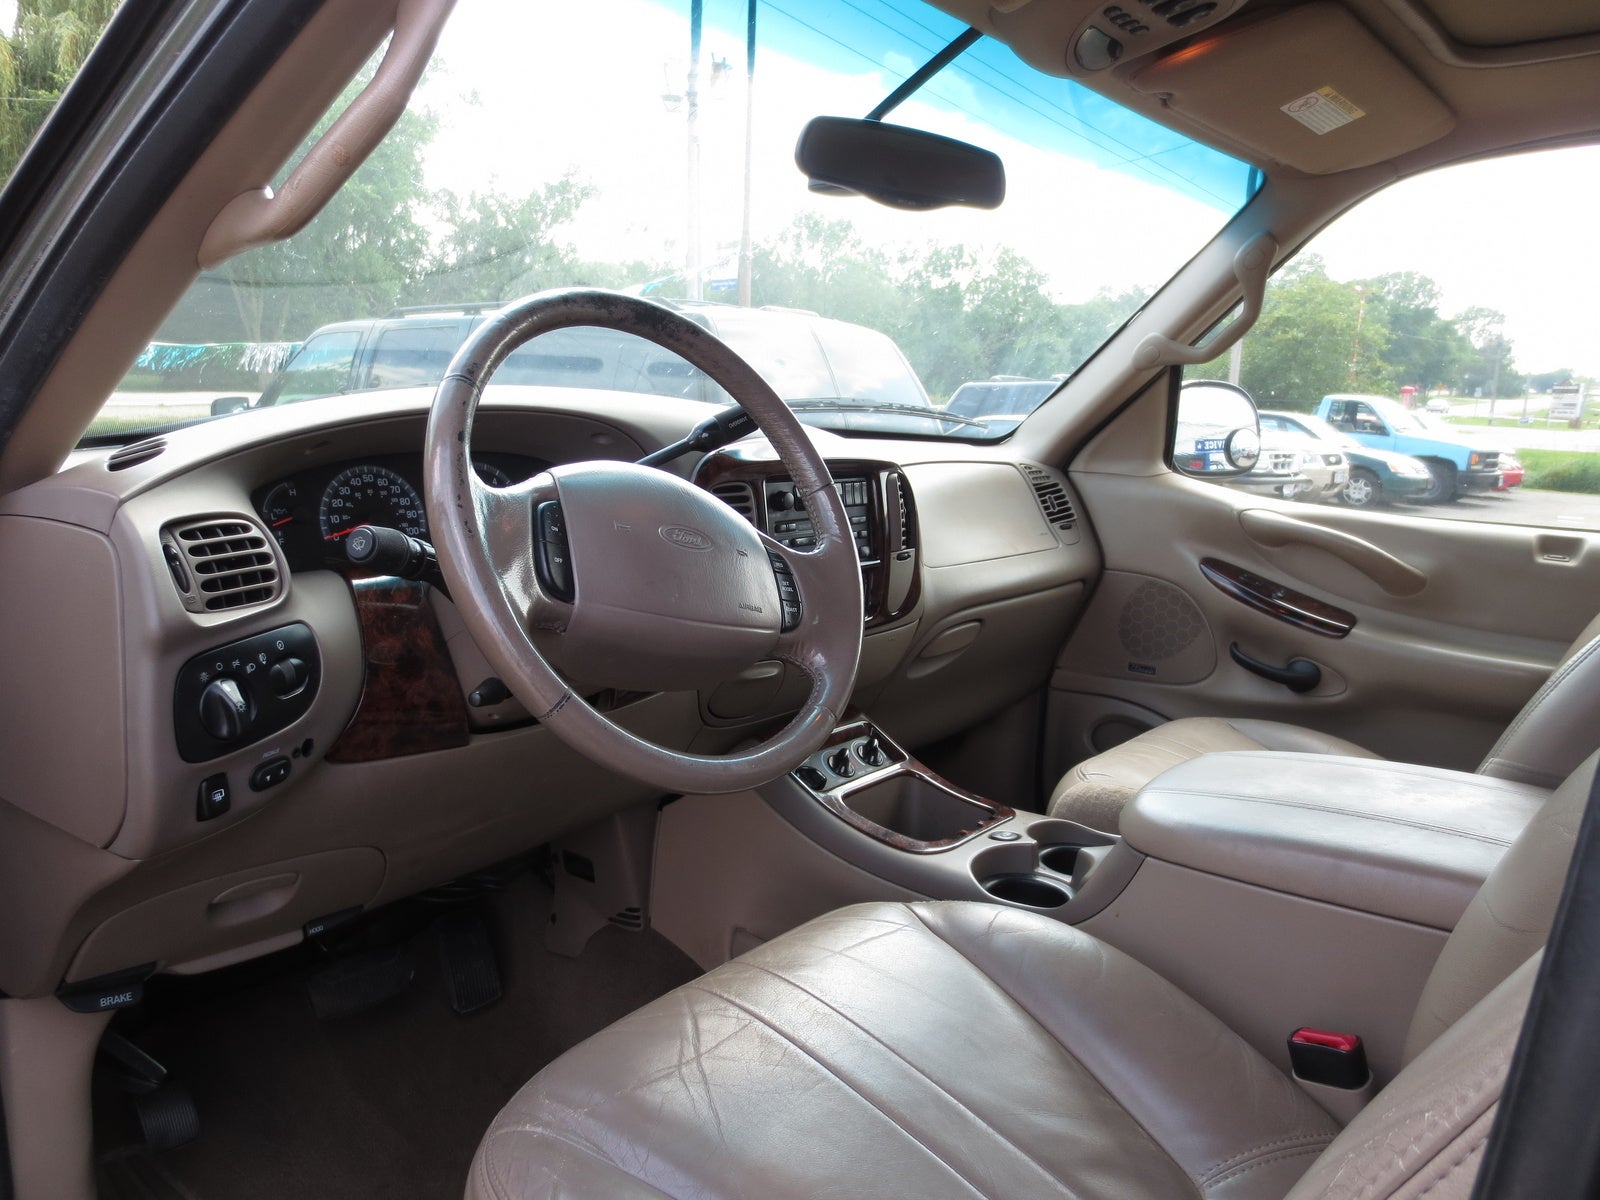 2000 Ford expedition interior photos #8